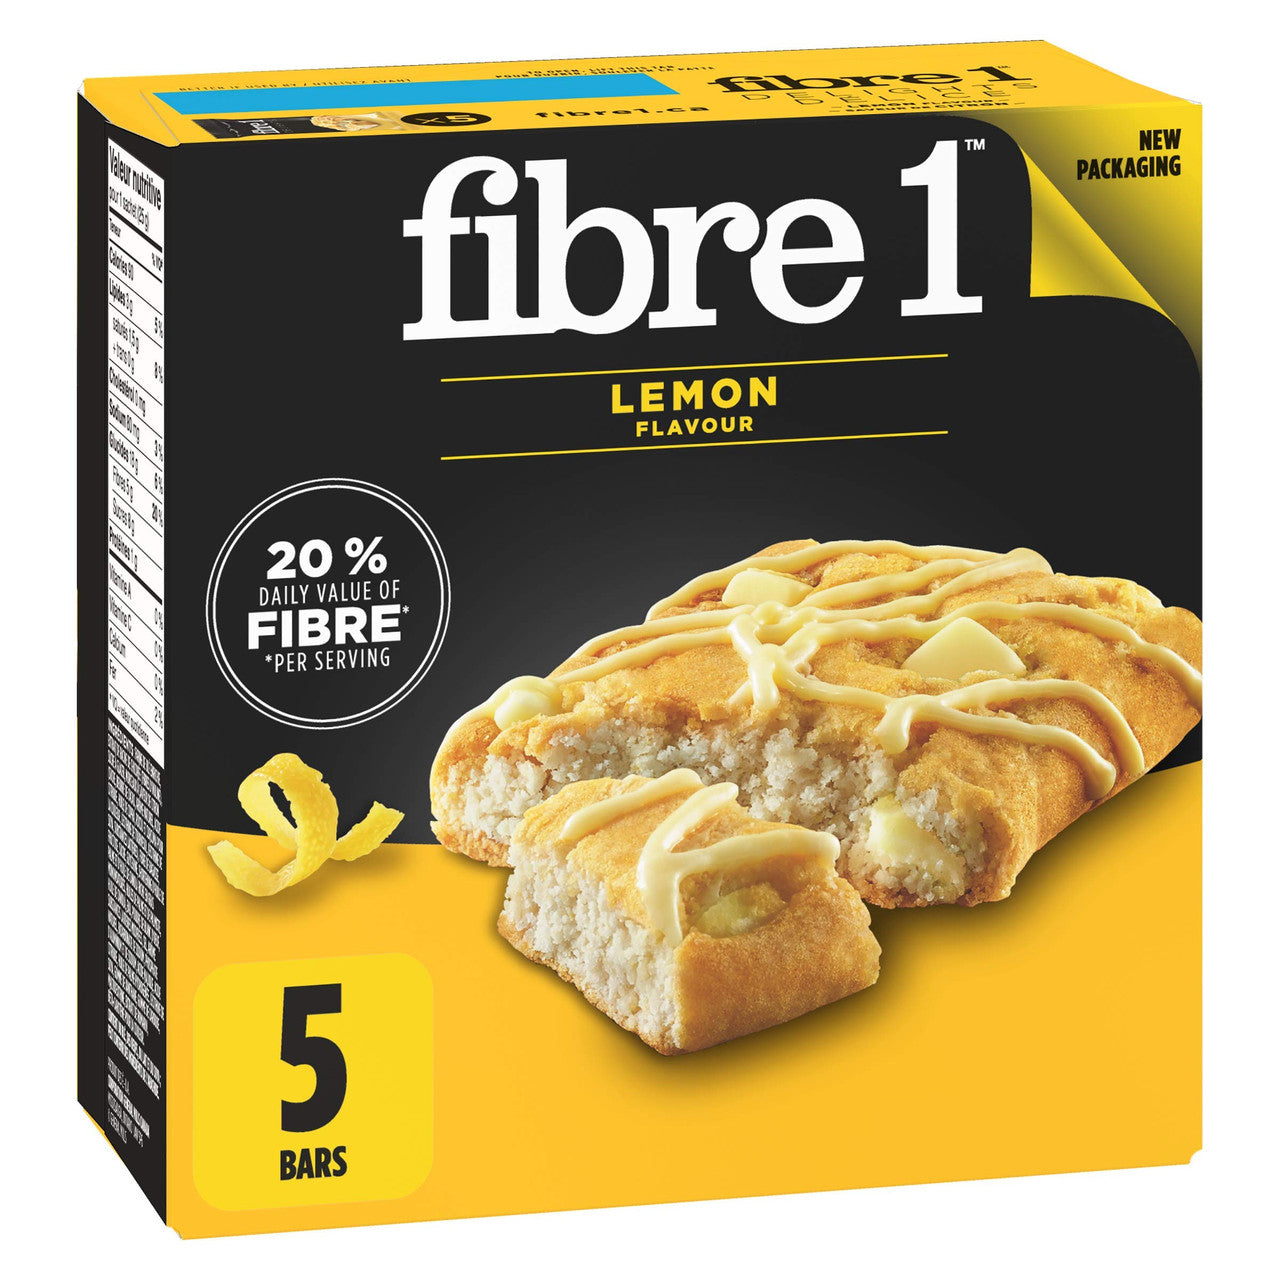 Fibre 1 Delights Bar, Lemon Flavour, 5ct, 125g/4.4oz, {Imported from Canada}